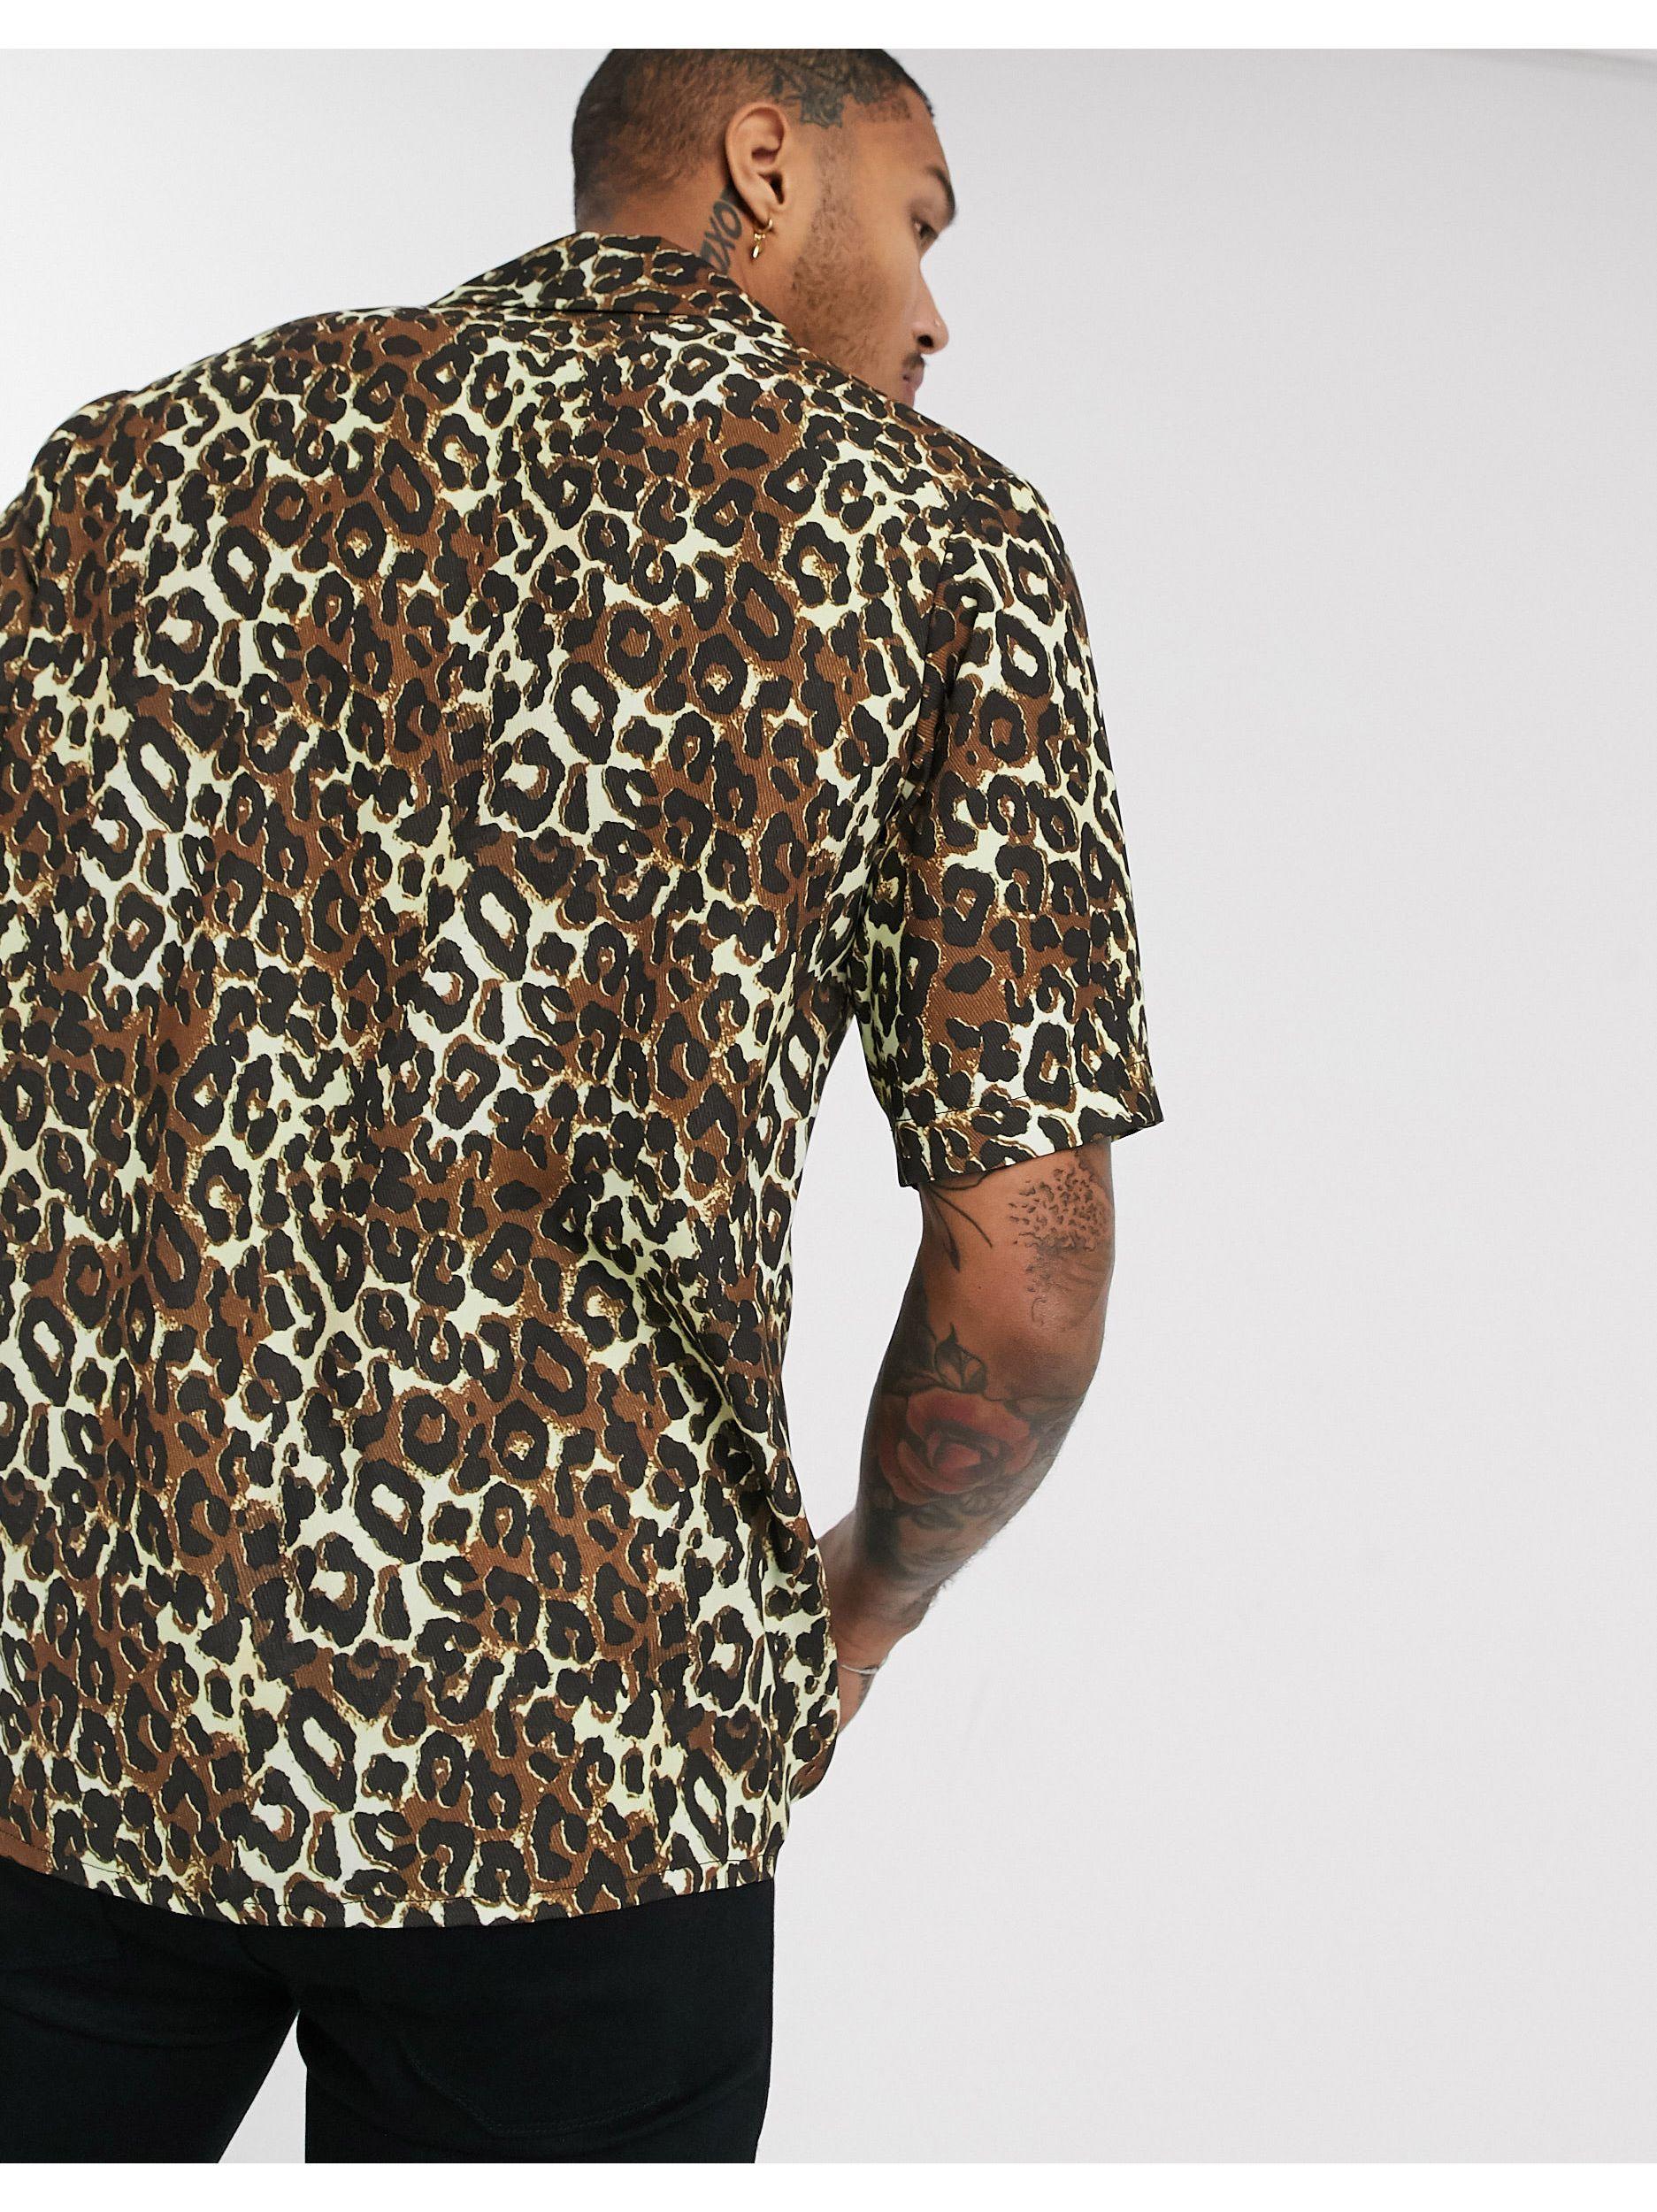 Reclaimed (vintage) Synthetic Leopard Print Shirt in Brown for Men - Lyst